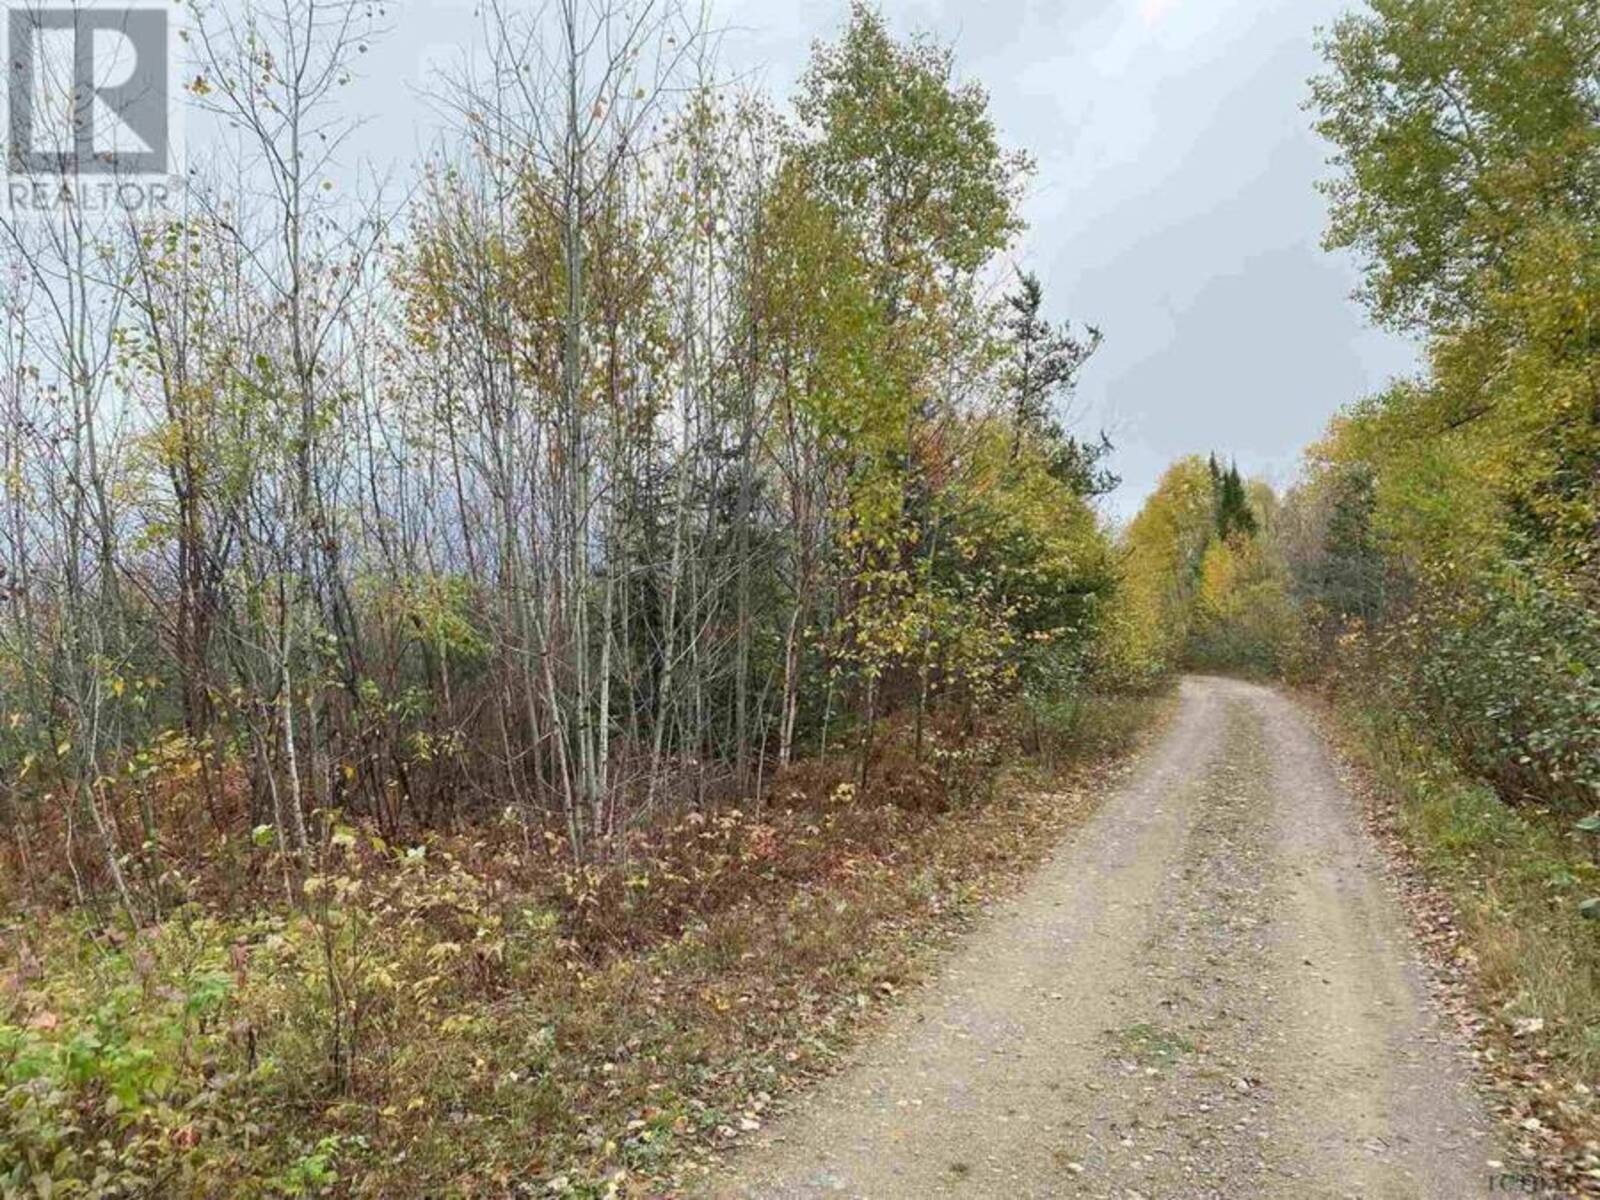 Lot 1 Con 5 PCL 6283, 6284, 6285, 6286 East of Road, Marter, Ontario P0J 1H0